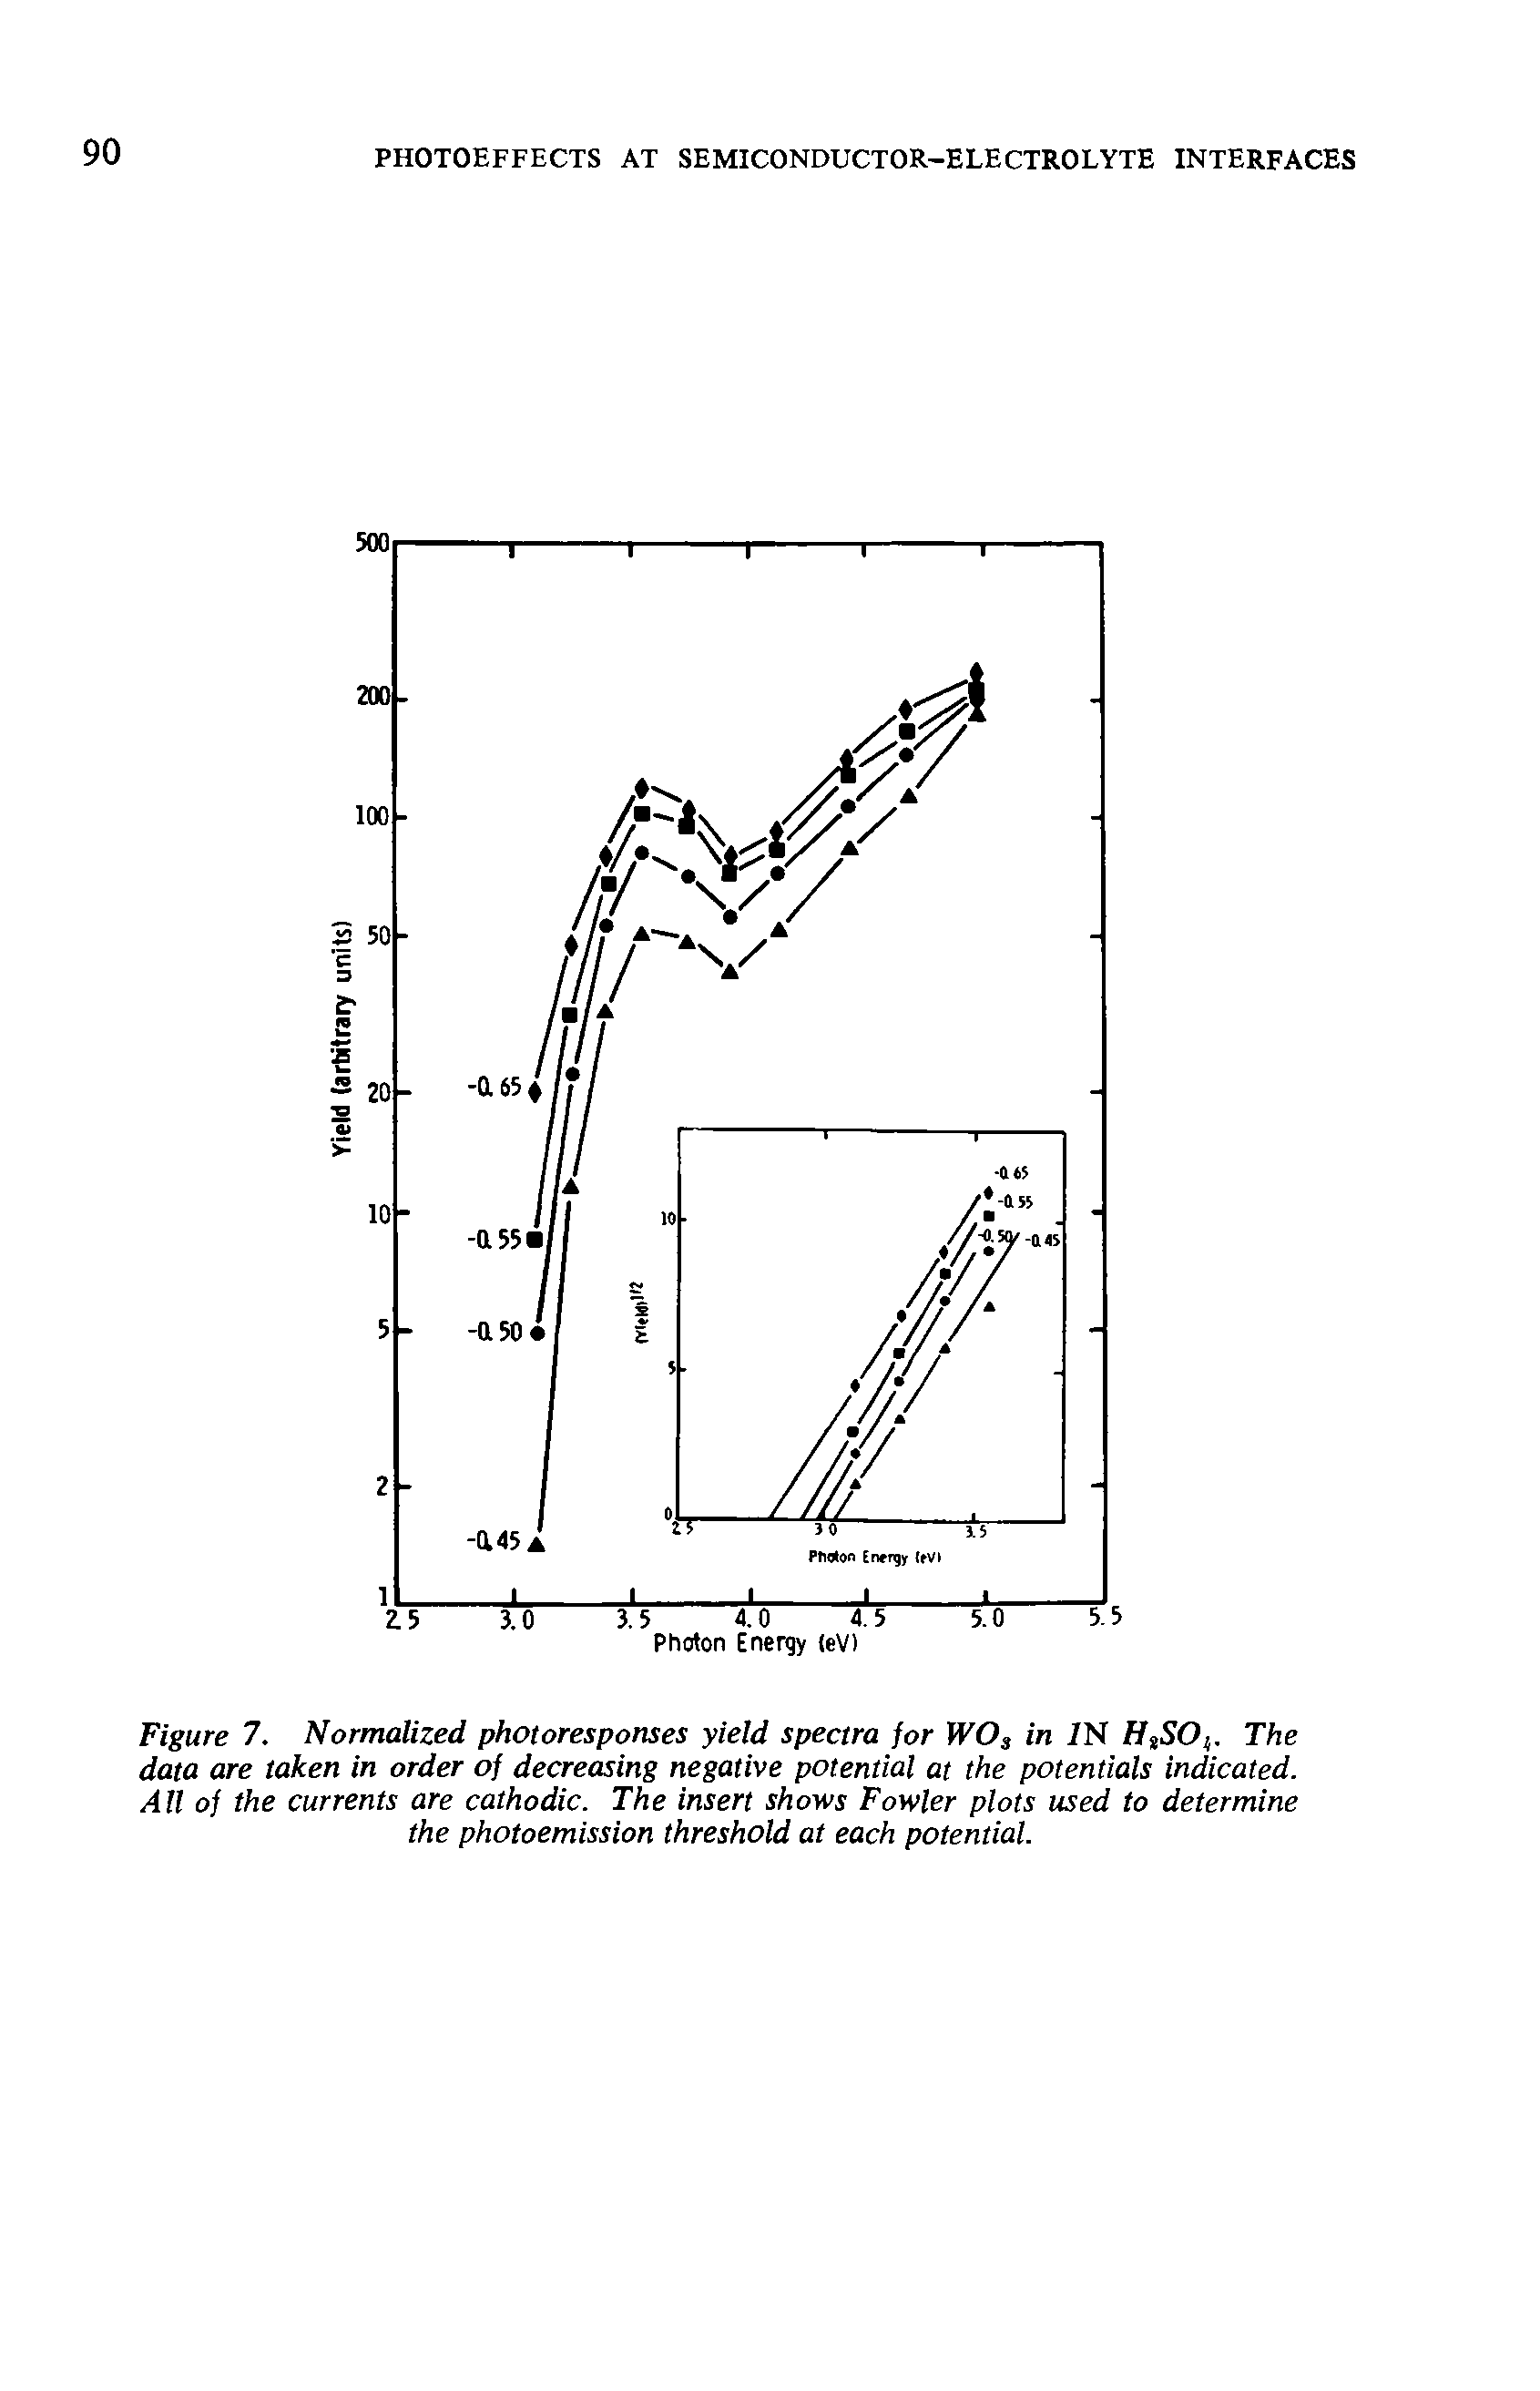 Figure 7. Normalized photoresponses yield spectra for WOs in 1N HsSO The data are taken in order of decreasing negative potential at the potentials indicated. All of the currents are cathodic. The insert shows Fowler plots used to determine the photoemission threshold at each potential.